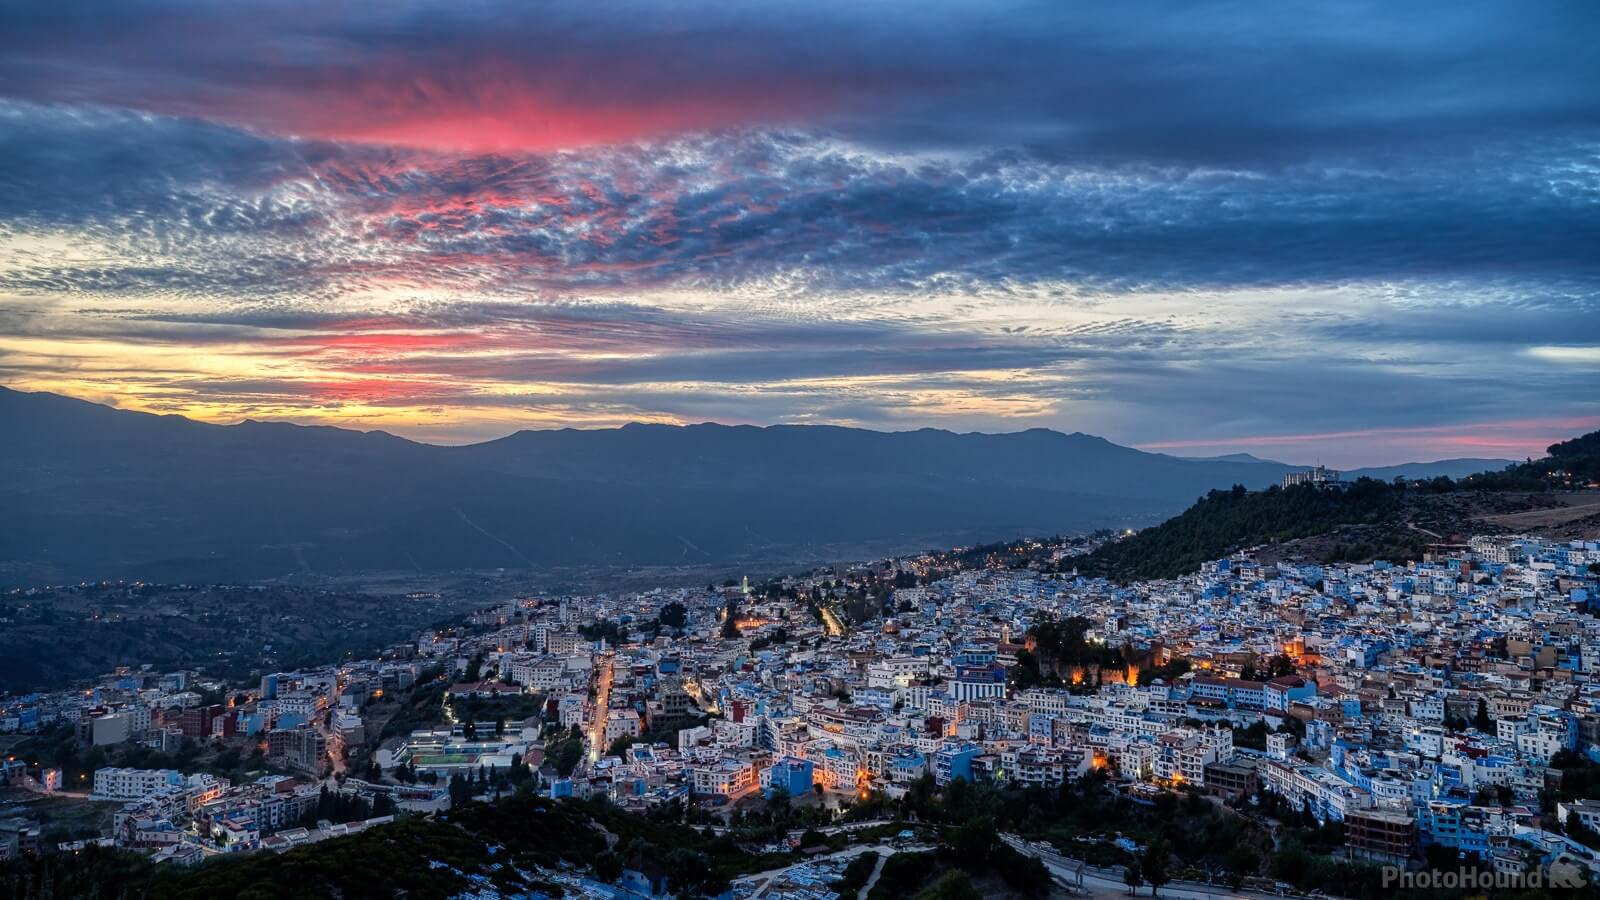 Image of Spanish Mosque at Chefchaouen by Juraj Zimányi